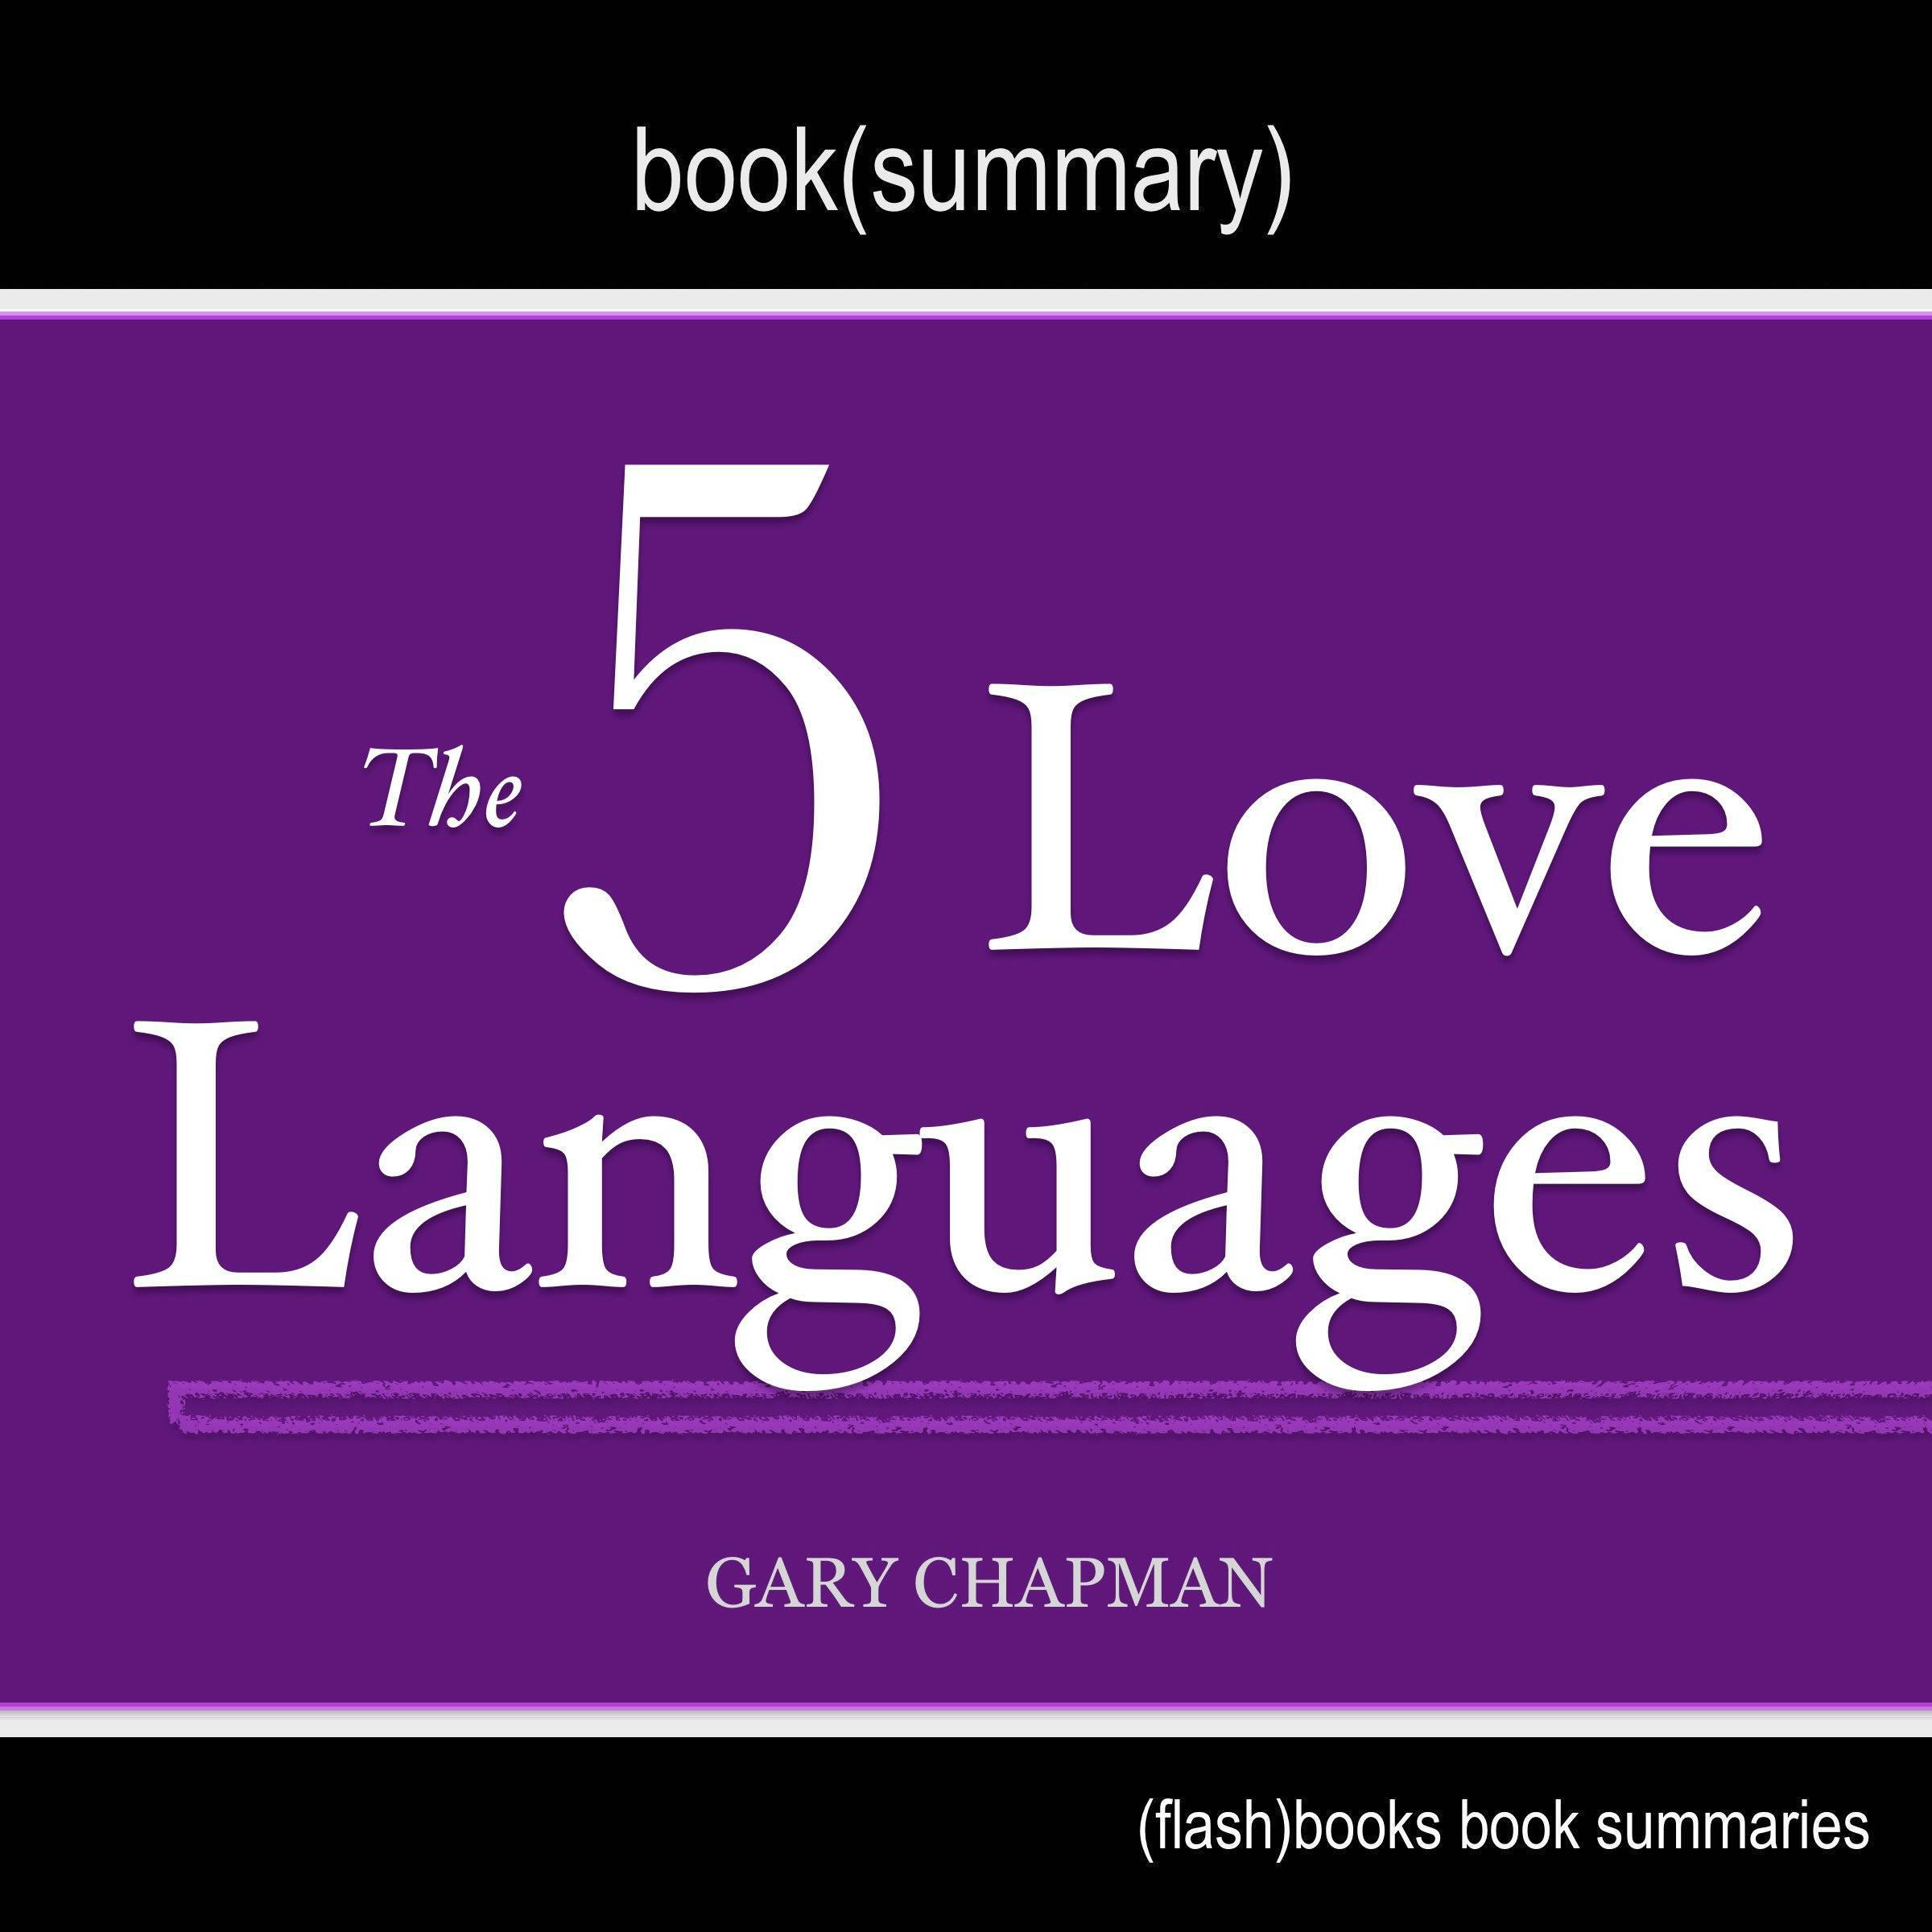 Book Summary of The 5 Love Languages by Gary Chapman - undefined